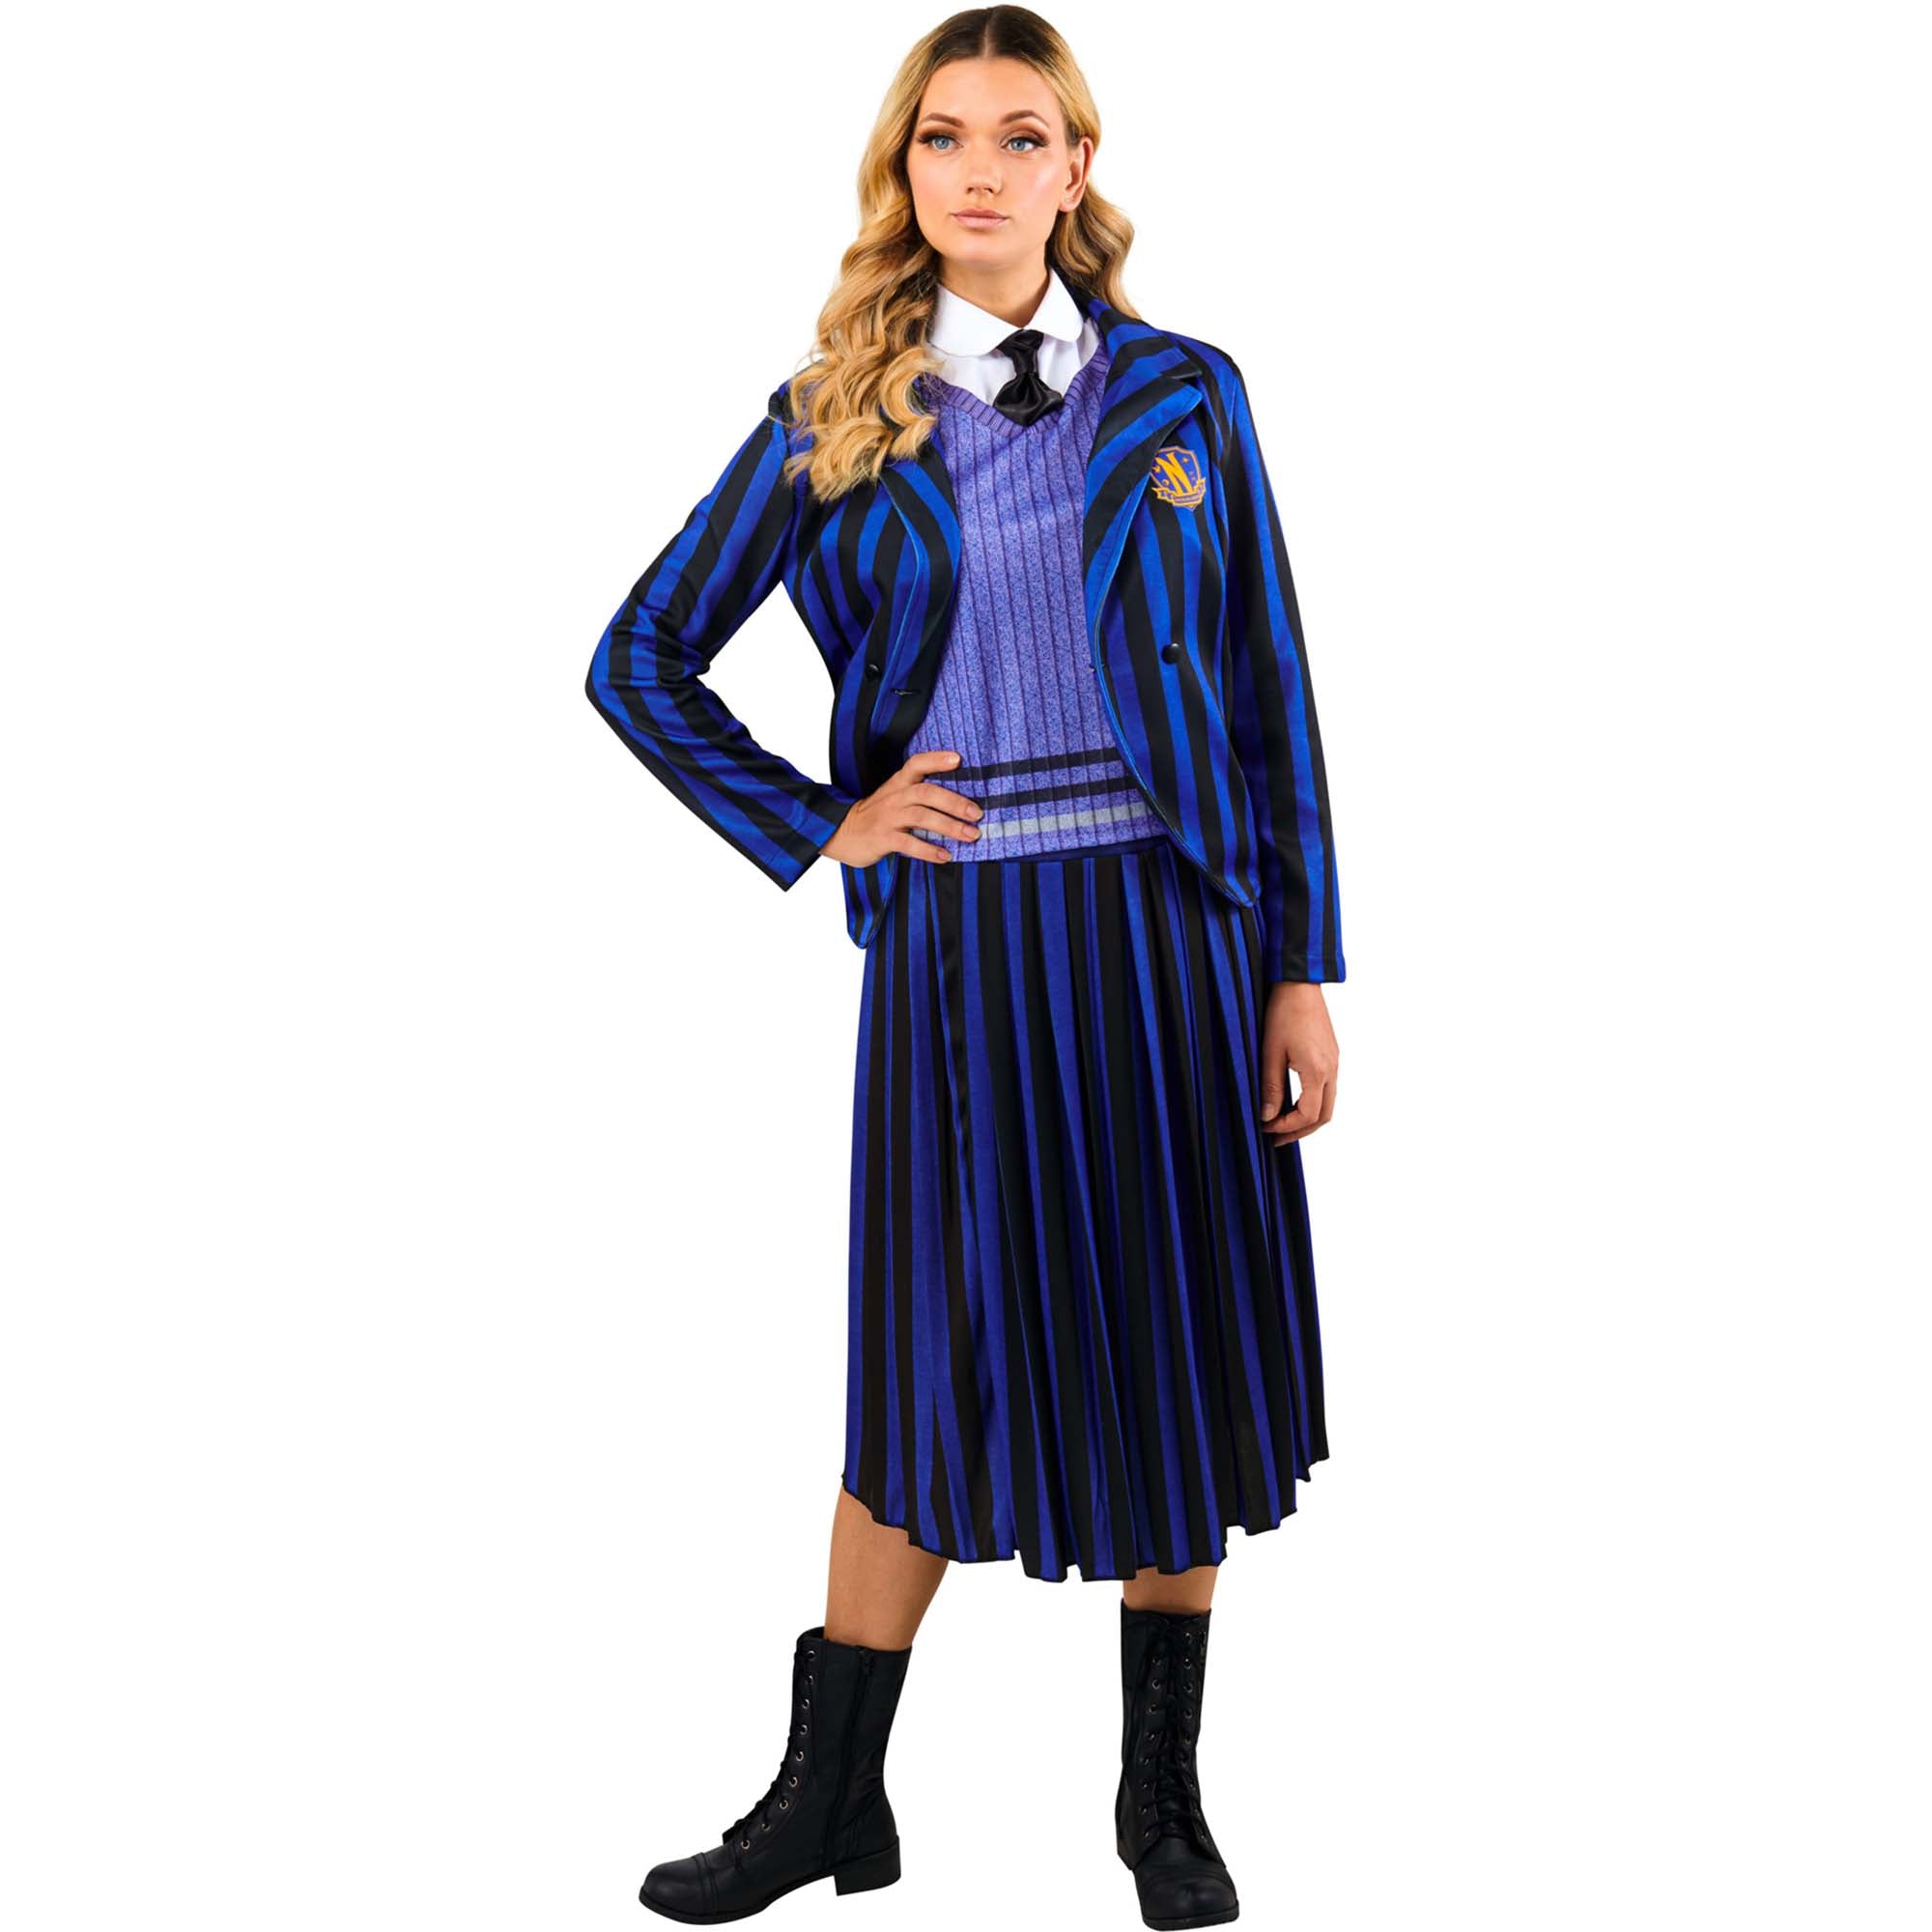 Wednesday Academy Uniform Costume for Adults